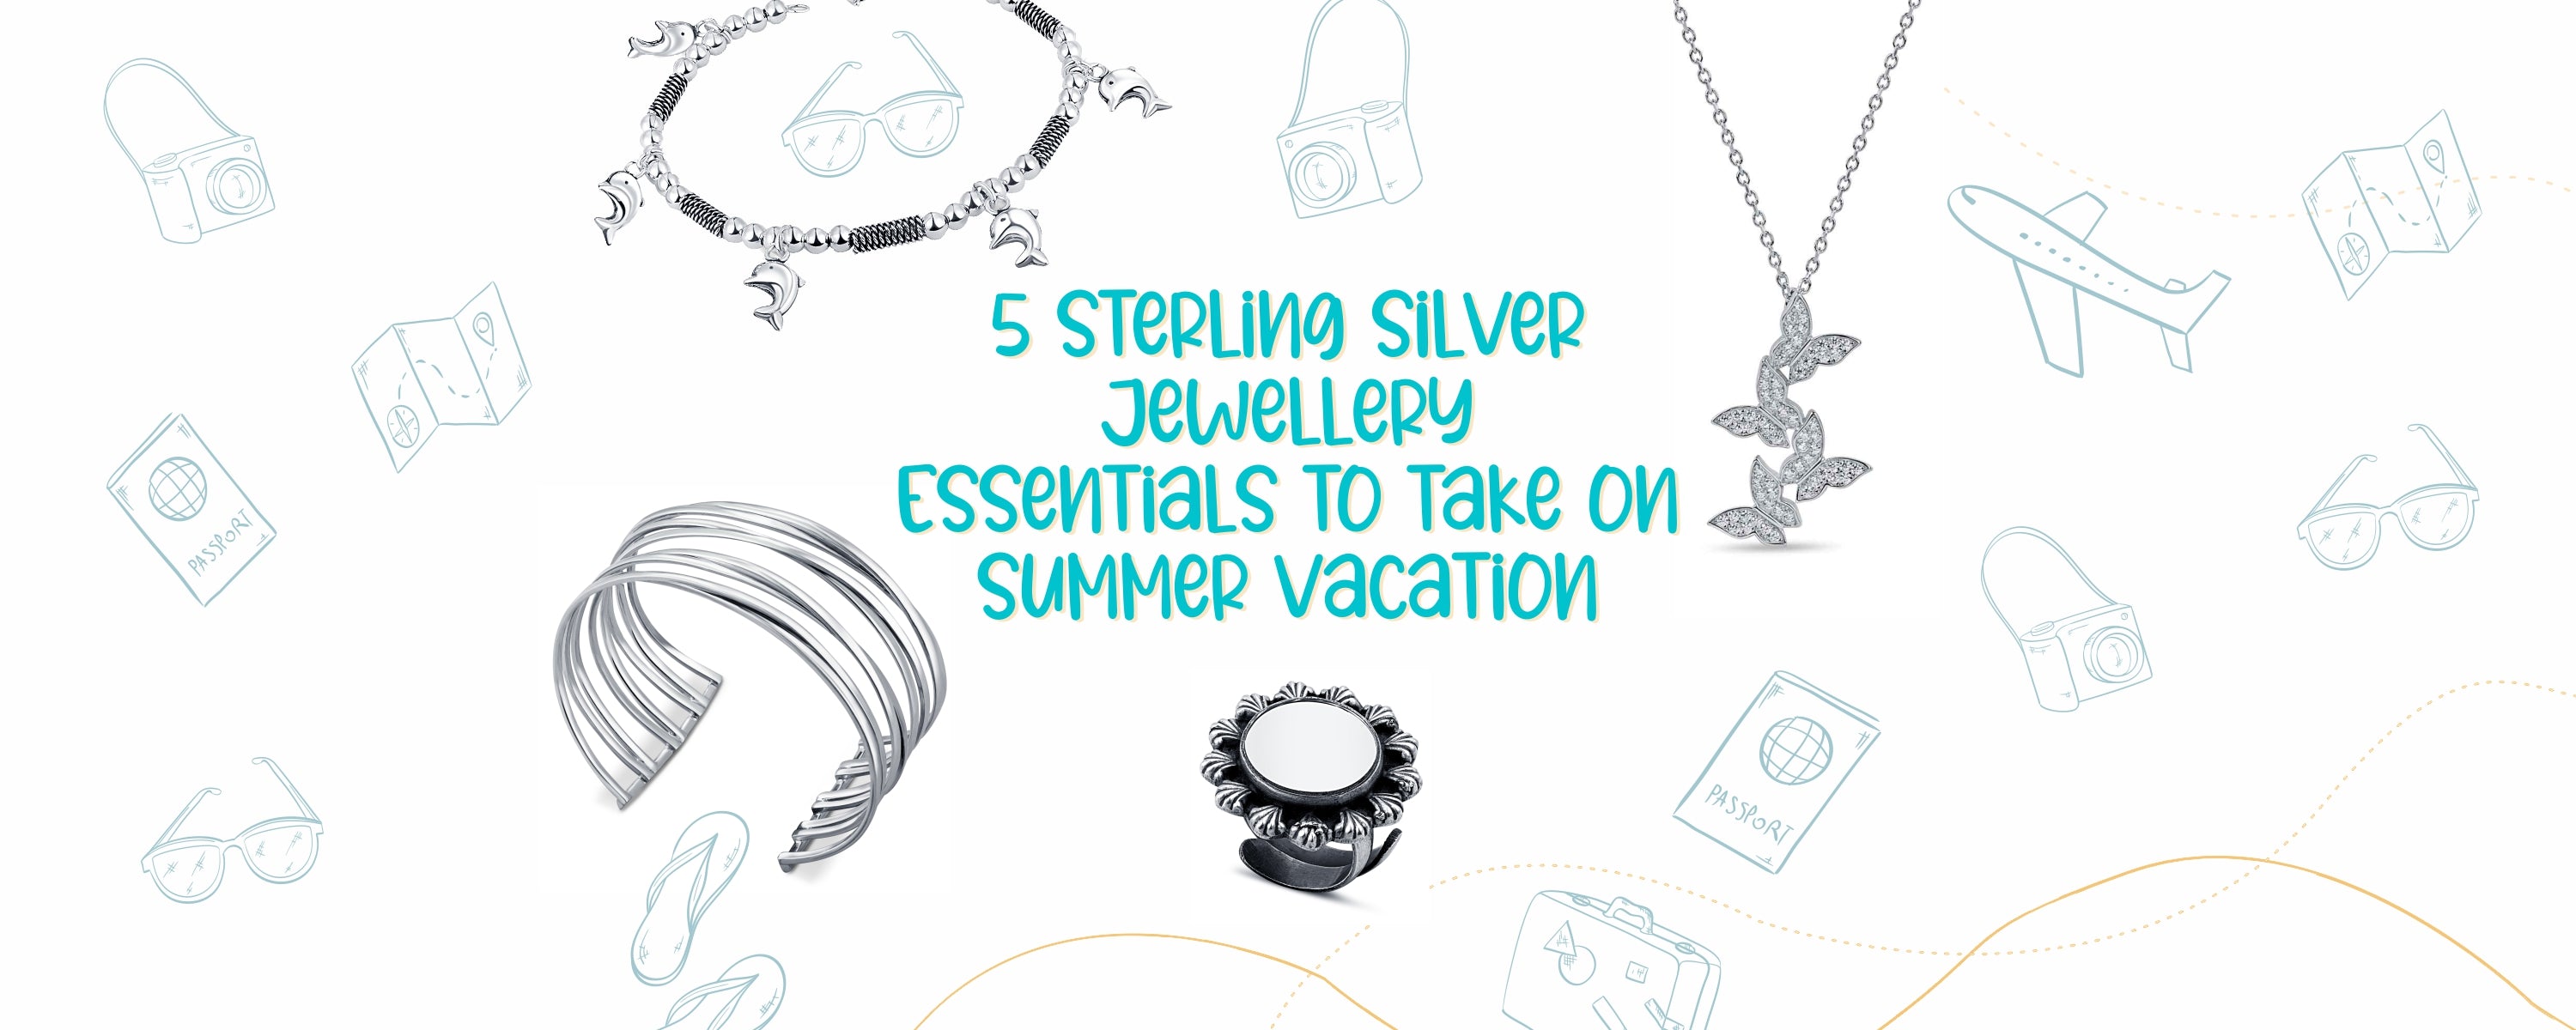 5 Sterling Silver Jewellery Essentials to Take on Summer Vacation